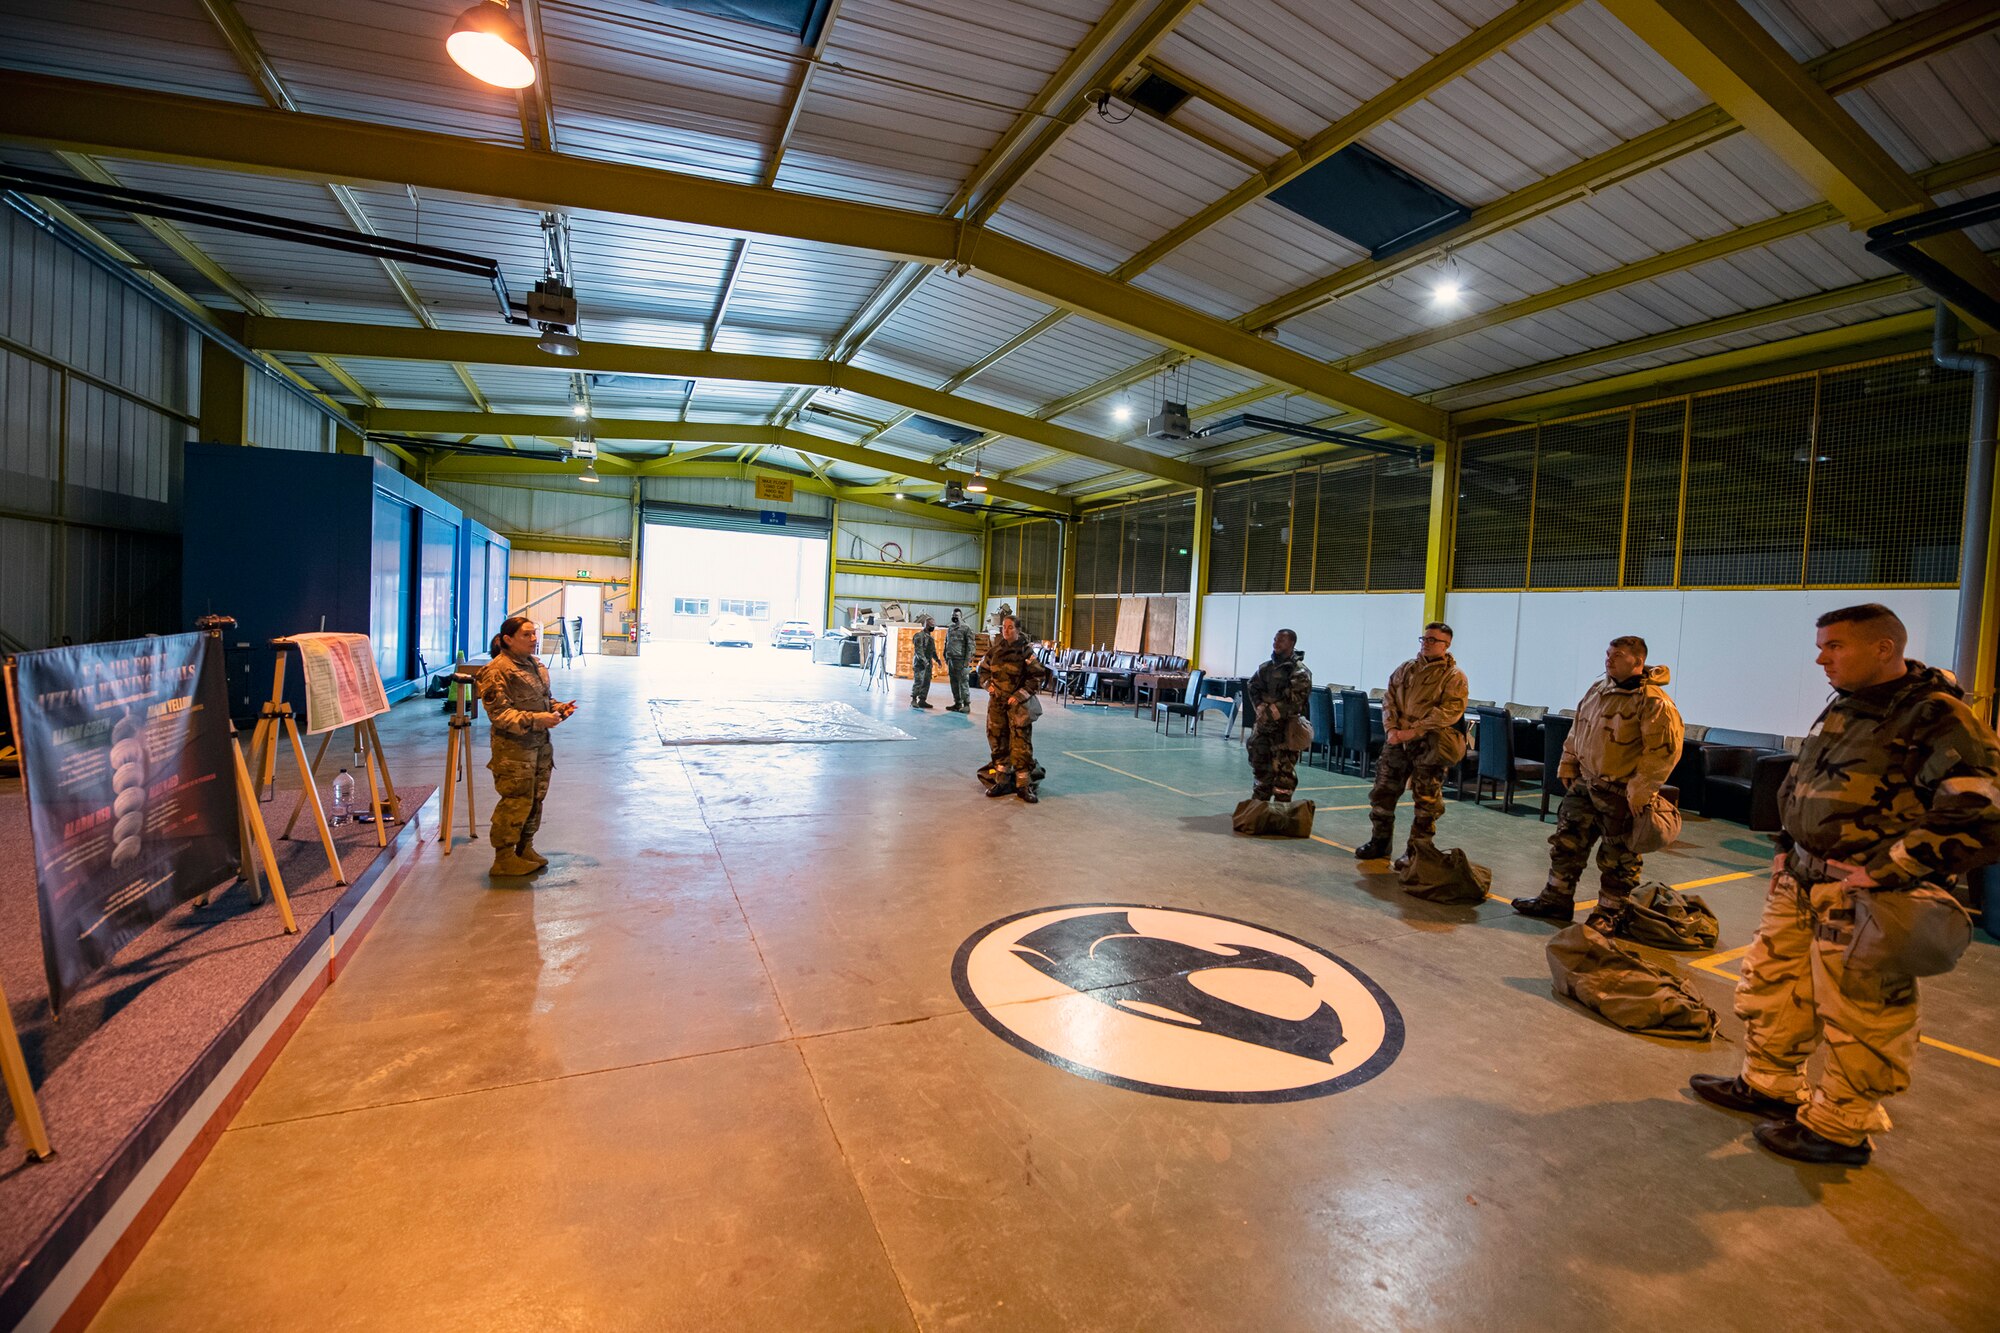 U.S. Air Force Master Sgt. Terri Adams, left, 423d Civil Engineering squadron NCO in charge of emergency management, briefs Airmen from the 501st Combat Support Wing during Ability to Survive and Operate training at RAF Alconbury, England, Aug. 27, 2021. The ATSO rodeo was designed to reinforce Airmen’s ability to properly utilize their MOPP gear in a potential chemical environment. (U.S. Air Force photo by Senior Airman Eugene Oliver)